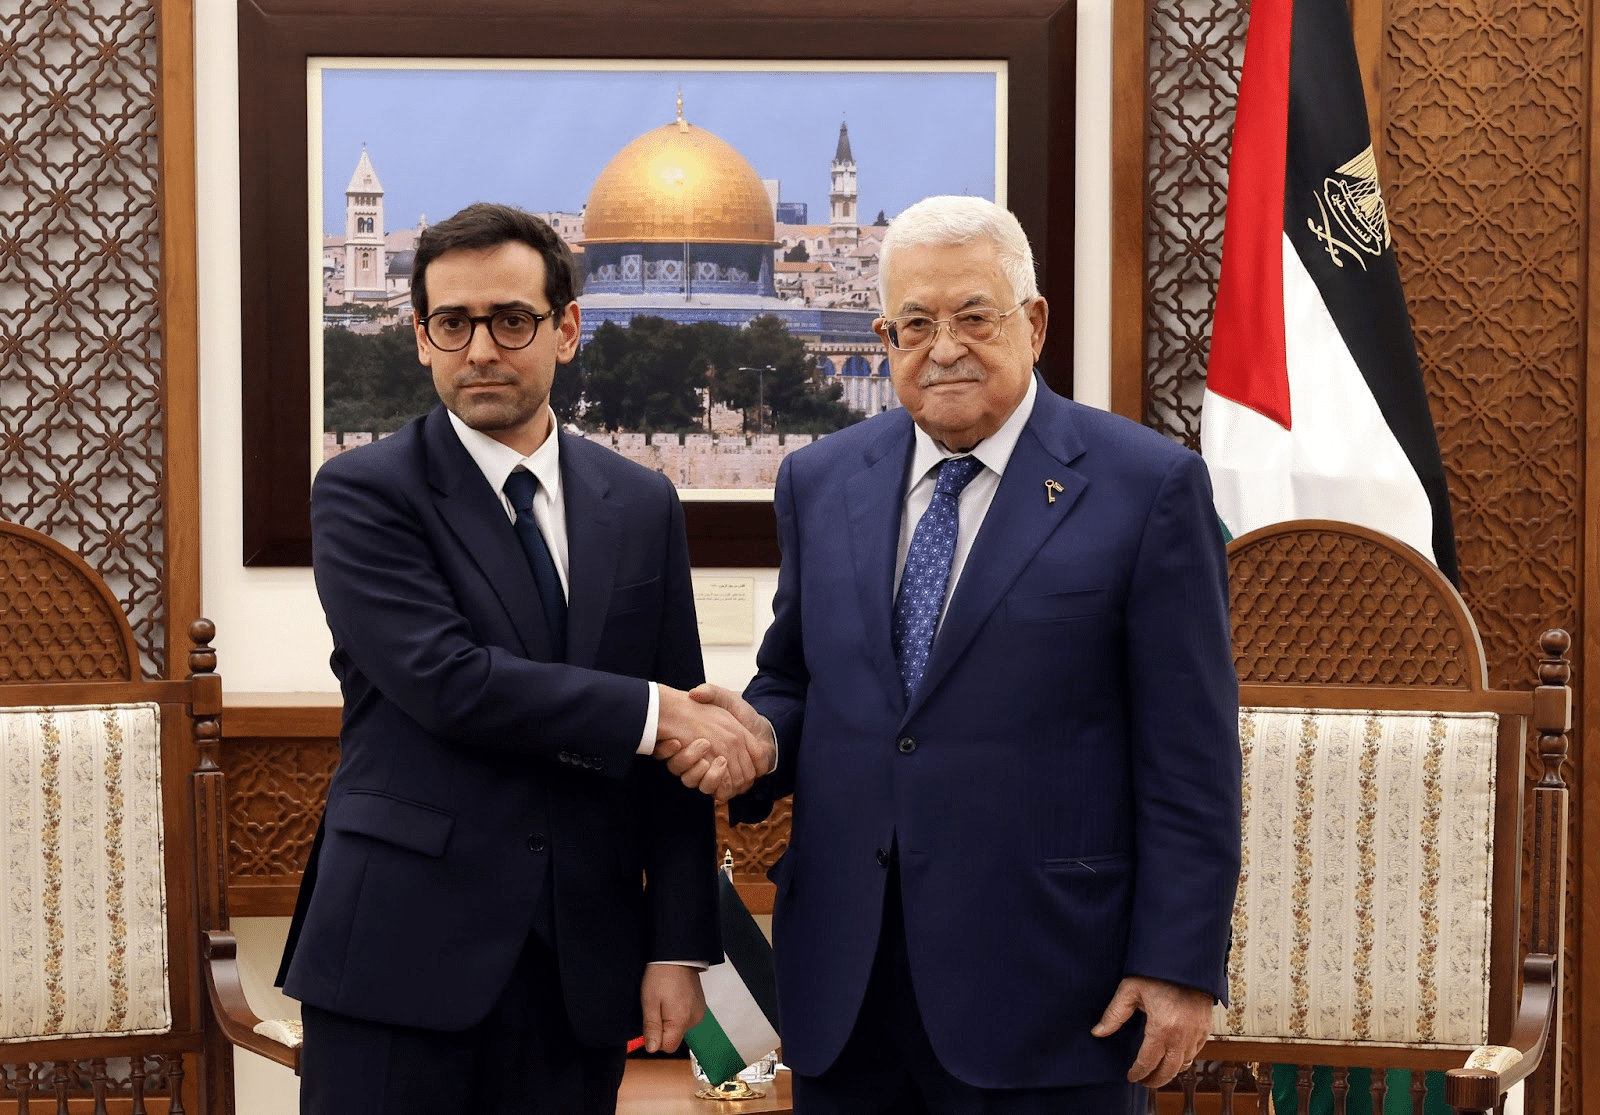 Chairman of the Palestinian Authority Mahmoud Abbas met with French Foreign Minister Stéphane Séjourné in Ramallah | Photo: Mahmoud Abbas’ Facebook page